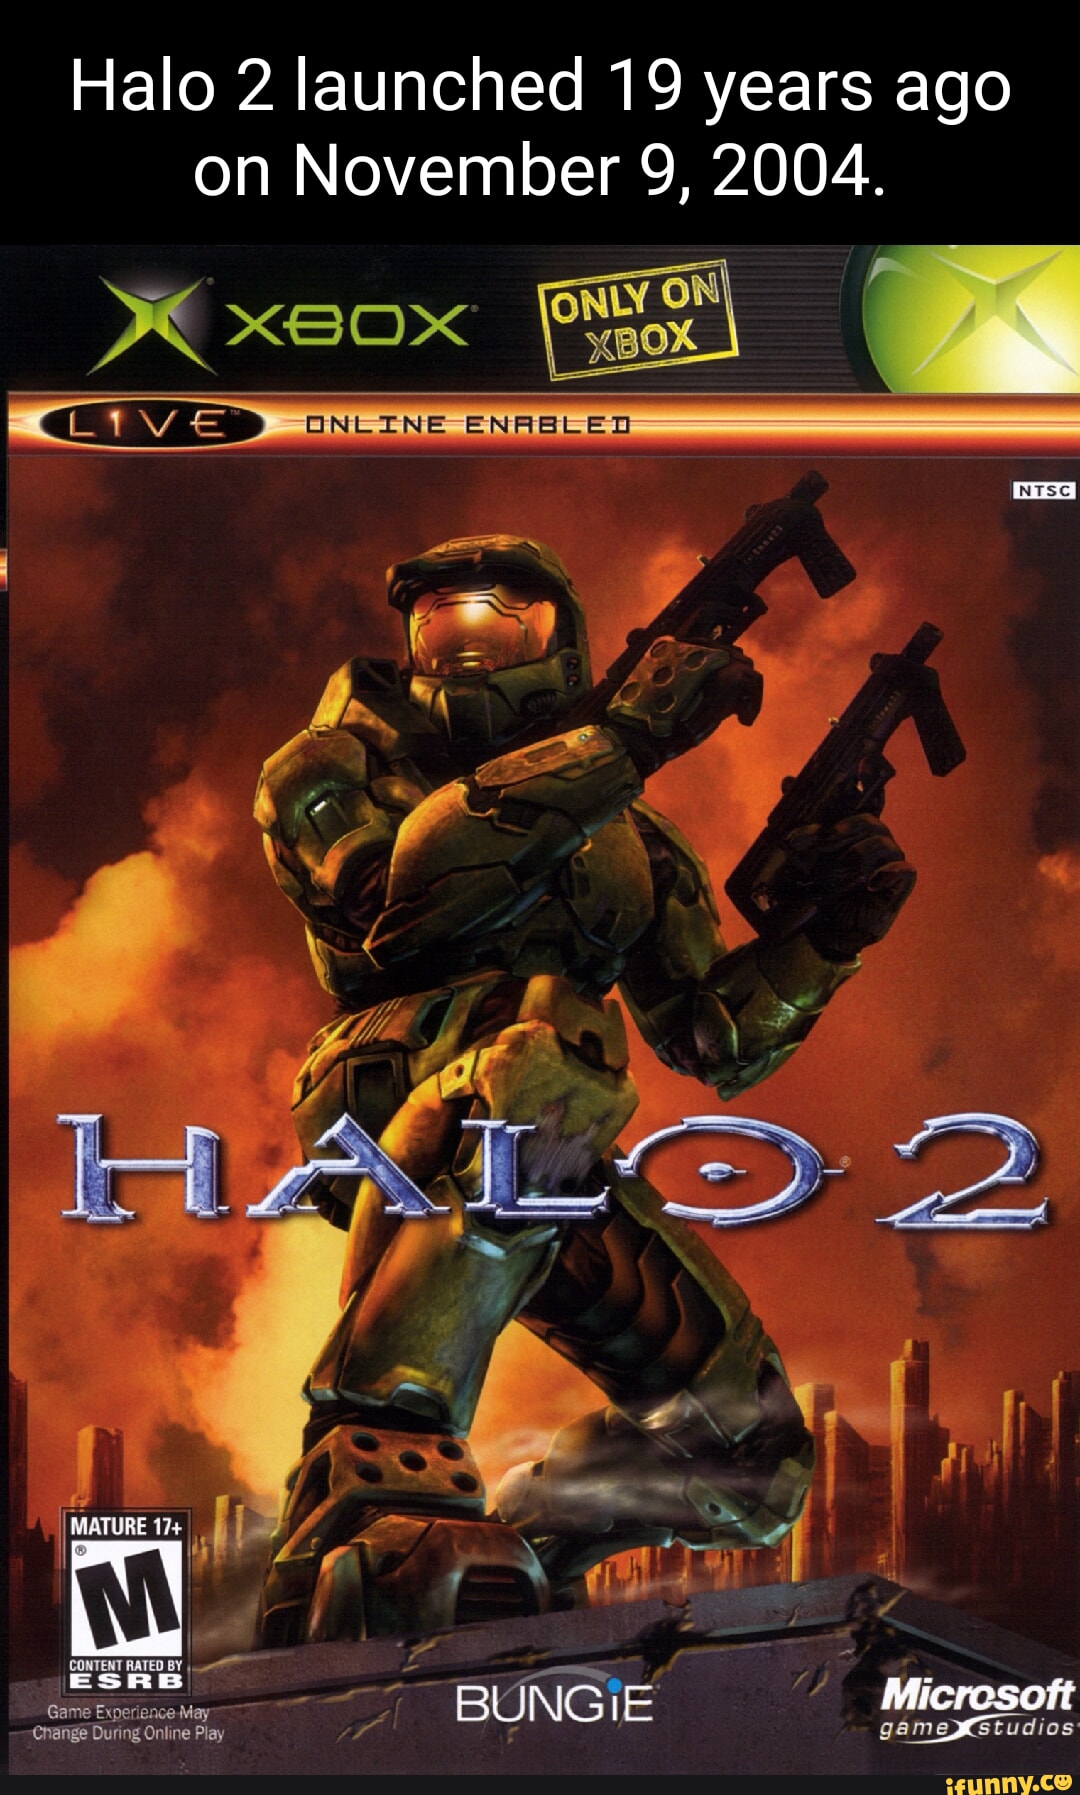 Halo 2 launched 19 years ago 004. ONLINE ENABLED aa MATURE 17+ it